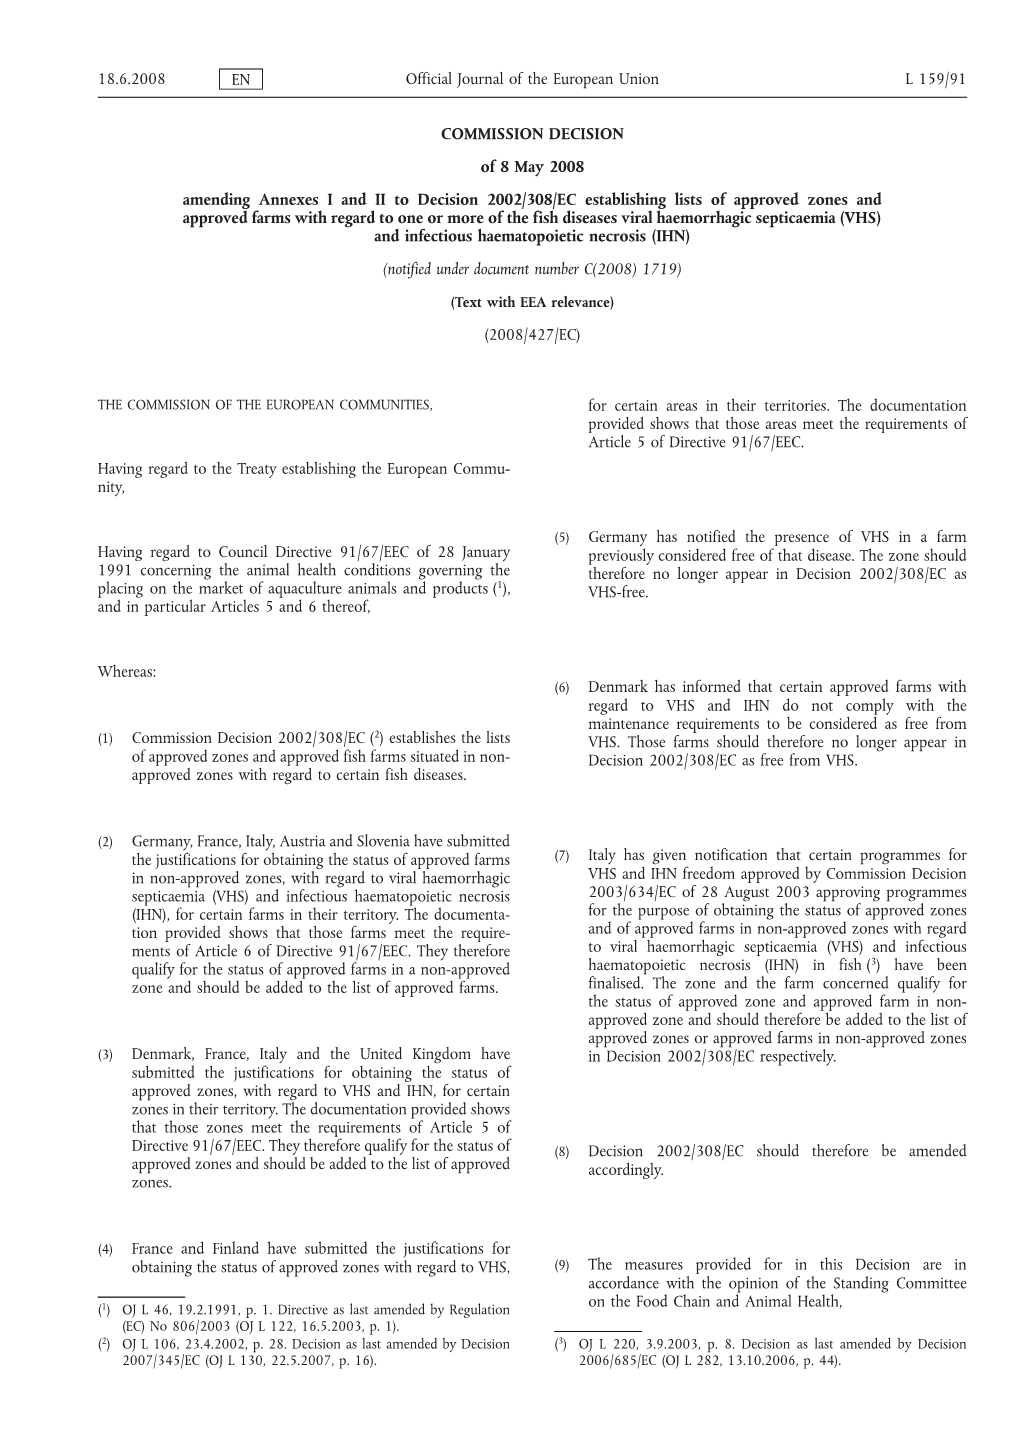 COMMISSION DECISION of 8 May 2008 Amending Annexes I and II To